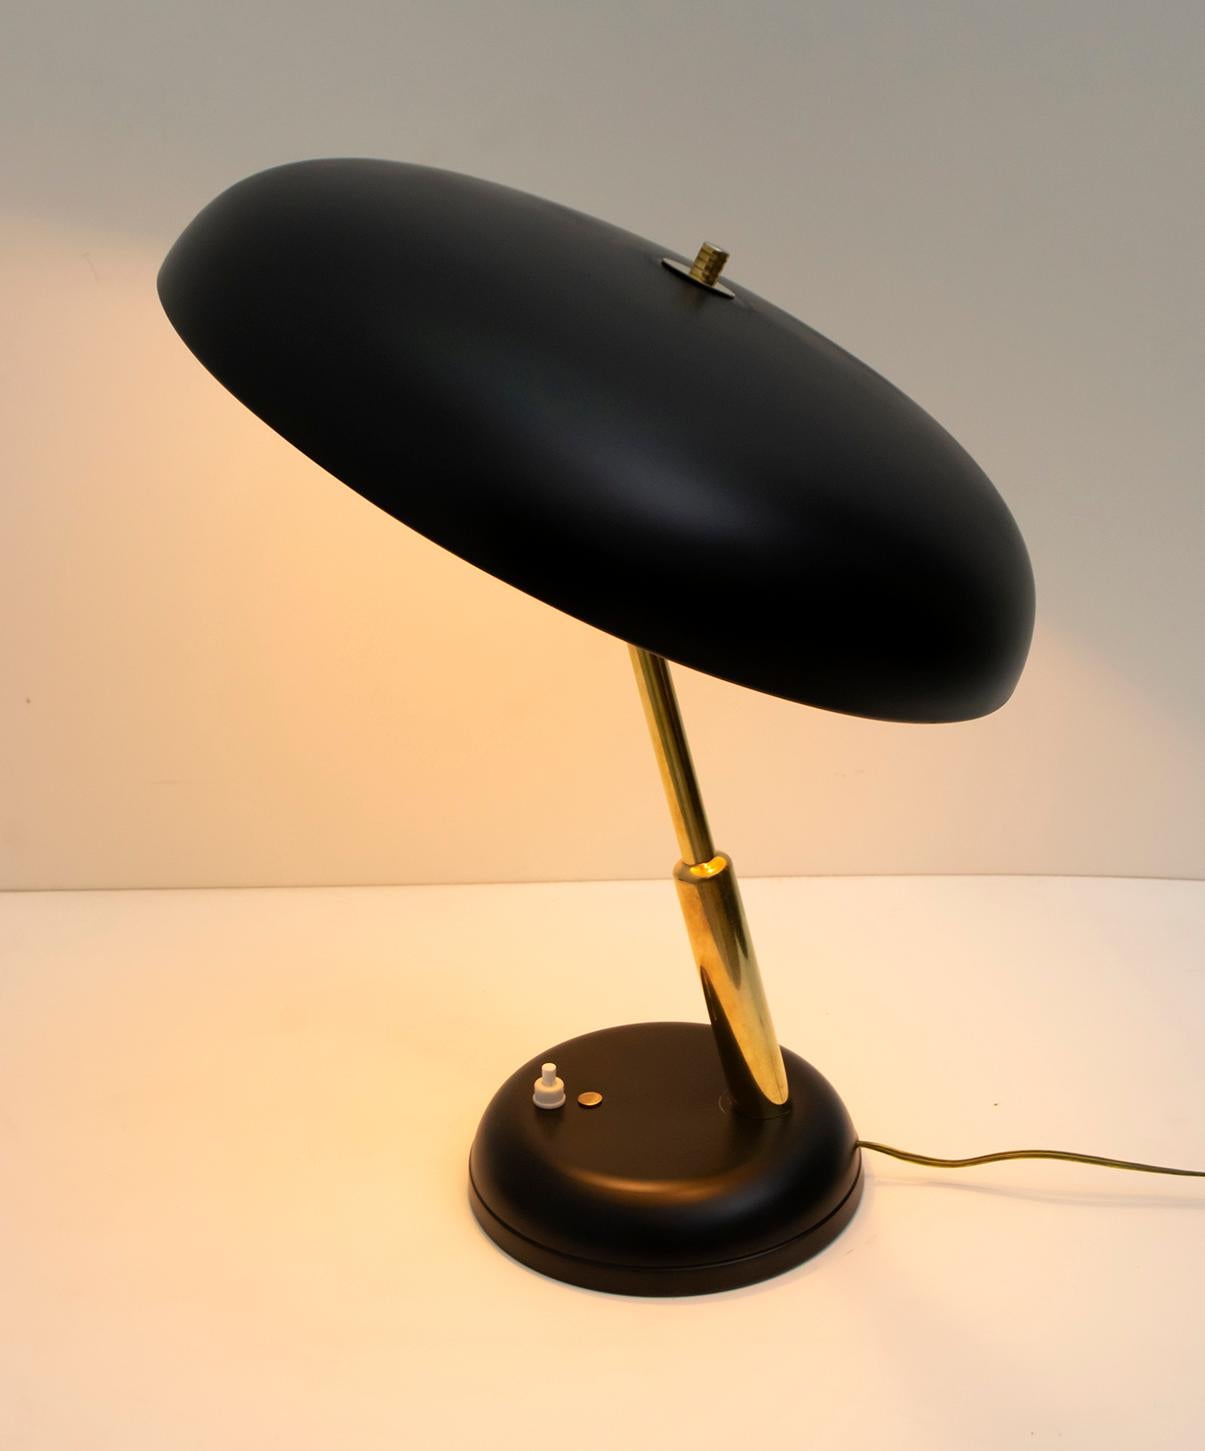 Elegant ministerial lamp made of brass and black lacquered aluminum, 1950s. The round base with beveled edge has a diameter of Ø17 cm, a mushroom-shaped hat of Ø30 cm, in black lacquered aluminum, the stem in brass. Height 40 cm. The antique